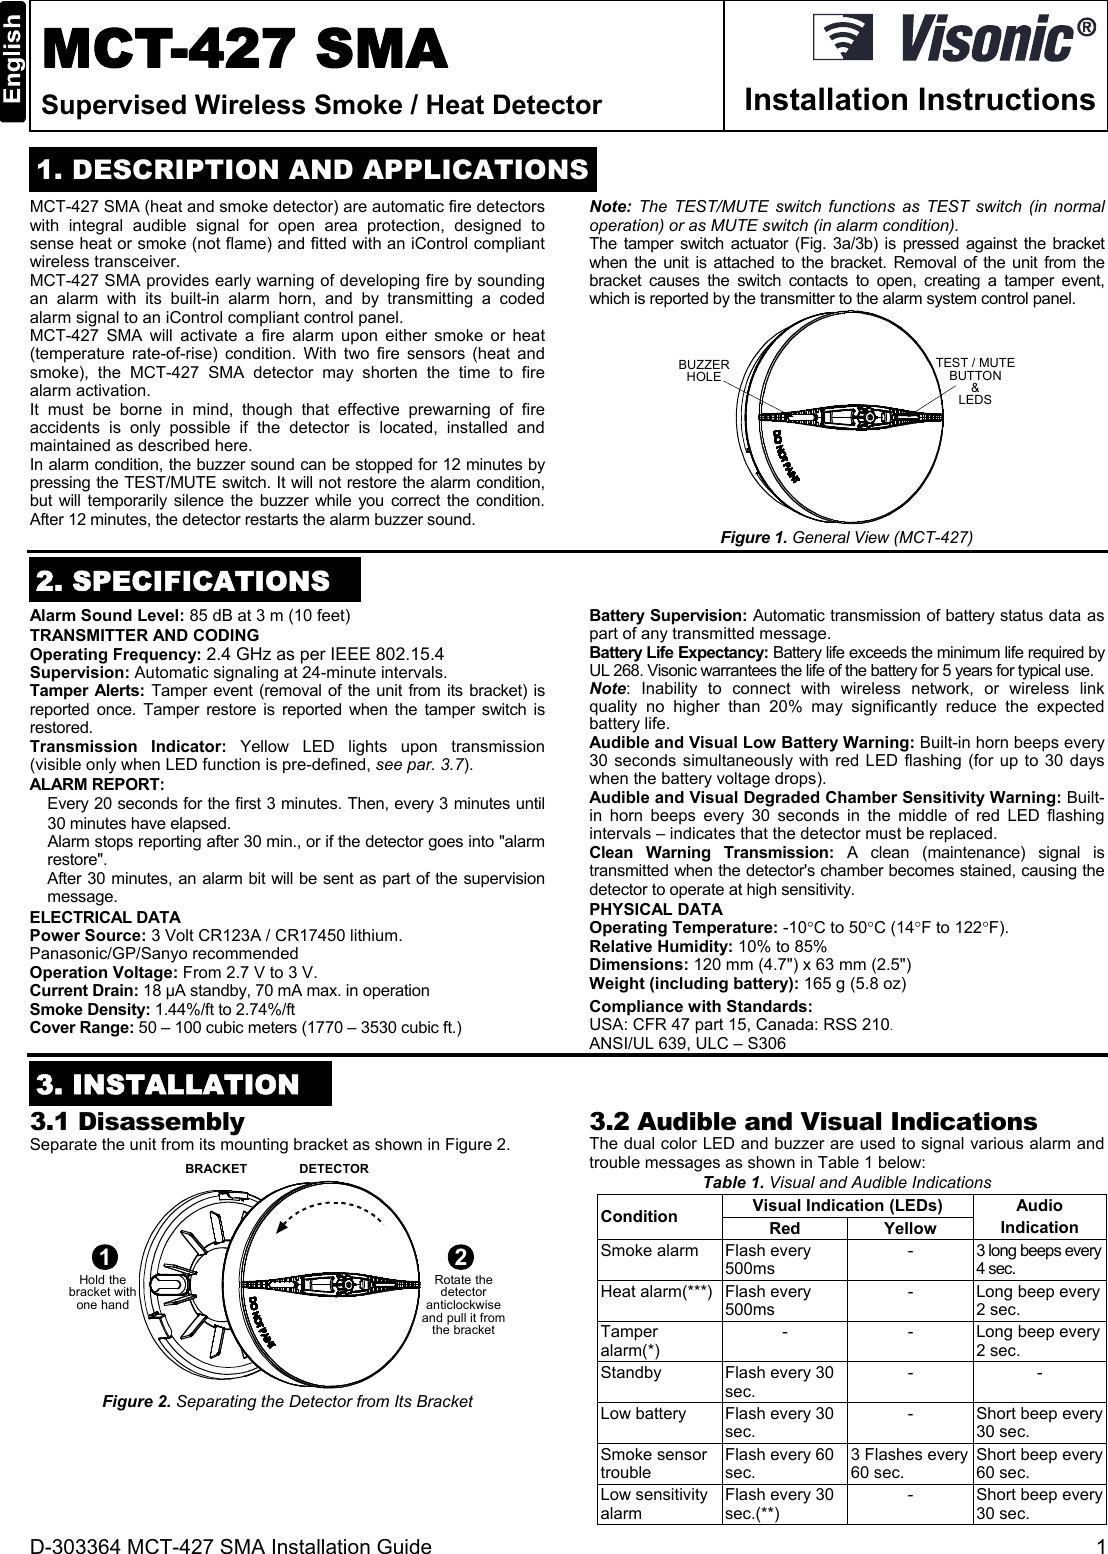 D-303364 MCT-427 SMA Installation Guide  1  MCT-427 SMA Supervised Wireless Smoke / Heat Detector  Installation Instructions  1. DESCRIPTION AND APPLICATIONS MCT-427 SMA (heat and smoke detector) are automatic fire detectors with integral audible signal for open area protection, designed to sense heat or smoke (not flame) and fitted with an iControl compliant wireless transceiver. MCT-427 SMA provides early warning of developing fire by sounding an alarm with its built-in alarm horn, and by transmitting a coded alarm signal to an iControl compliant control panel.  MCT-427 SMA will activate a fire alarm upon either smoke or heat (temperature rate-of-rise) condition. With two fire sensors (heat and smoke), the MCT-427 SMA detector may shorten the time to fire alarm activation. It must be borne in mind, though that effective prewarning of fire accidents is only possible if the detector is located, installed and maintained as described here.  In alarm condition, the buzzer sound can be stopped for 12 minutes by pressing the TEST/MUTE switch. It will not restore the alarm condition, but will temporarily silence the buzzer while you correct the condition. After 12 minutes, the detector restarts the alarm buzzer sound. Note:  The TEST/MUTE switch functions as TEST switch (in normal operation) or as MUTE switch (in alarm condition). The tamper switch actuator (Fig. 3a/3b) is pressed against the bracket when the unit is attached to the bracket. Removal of the unit from the bracket causes the switch contacts to open, creating a tamper event, which is reported by the transmitter to the alarm system control panel. BUZZERHOLE TEST / MUTEBUTTON&amp;LEDS Figure 1. General View (MCT-427)  2. SPECIFICATIONS Alarm Sound Level: 85 dB at 3 m (10 feet) TRANSMITTER AND CODING Operating Frequency: 2.4 GHz as per IEEE 802.15.4 Supervision: Automatic signaling at 24-minute intervals. Tamper Alerts: Tamper event (removal of the unit from its bracket) is reported once. Tamper restore is reported when the tamper switch is restored. Transmission Indicator: Yellow LED lights upon transmission (visible only when LED function is pre-defined, see par. 3.7). ALARM REPORT: Every 20 seconds for the first 3 minutes. Then, every 3 minutes until 30 minutes have elapsed.   Alarm stops reporting after 30 min., or if the detector goes into &quot;alarm restore&quot;. After 30 minutes, an alarm bit will be sent as part of the supervision message. ELECTRICAL DATA Power Source: 3 Volt CR123A / CR17450 lithium. Panasonic/GP/Sanyo recommended Operation Voltage: From 2.7 V to 3 V. Current Drain: 18 µA standby, 70 mA max. in operation  Smoke Density: 1.44%/ft to 2.74%/ft Cover Range: 50 – 100 cubic meters (1770 – 3530 cubic ft.) Battery Supervision: Automatic transmission of battery status data as part of any transmitted message. Battery Life Expectancy: Battery life exceeds the minimum life required by UL 268. Visonic warrantees the life of the battery for 5 years for typical use.  Note: Inability to connect with wireless network, or wireless link quality no higher than 20% may significantly reduce the expected battery life. Audible and Visual Low Battery Warning: Built-in horn beeps every 30 seconds simultaneously with red LED flashing (for up to 30 days when the battery voltage drops). Audible and Visual Degraded Chamber Sensitivity Warning: Built-in horn beeps every 30 seconds in the middle of red LED flashing intervals – indicates that the detector must be replaced. Clean Warning Transmission: A clean (maintenance) signal is transmitted when the detector&apos;s chamber becomes stained, causing the detector to operate at high sensitivity. PHYSICAL DATA Operating Temperature: -10C to 50C (14F to 122F). Relative Humidity: 10% to 85% Dimensions: 120 mm (4.7&quot;) x 63 mm (2.5&quot;) Weight (including battery): 165 g (5.8 oz) Compliance with Standards:  USA: CFR 47 part 15, Canada: RSS 210. ANSI/UL 639, ULC – S306  3. INSTALLATION  3.1 Disassembly Separate the unit from its mounting bracket as shown in Figure 2.  BRACKET DETECTOR1Hold thebracket withone hand2Rotate thedetectoranticlockwiseand pull it fromthe bracket Figure 2. Separating the Detector from Its Bracket 3.2 Audible and Visual Indications The dual color LED and buzzer are used to signal various alarm and trouble messages as shown in Table 1 below: Table 1. Visual and Audible Indications Condition Visual Indication (LEDs) Audio Indication Red Yellow Smoke alarm Flash every 500ms  - 3 long beeps every 4 sec. Heat alarm(***) Flash every 500ms - Long beep every 2 sec. Tamper alarm(*) - - Long beep every 2 sec. Standby  Flash every 30 sec. - - Low battery Flash every 30 sec. - Short beep every 30 sec. Smoke sensor trouble Flash every 60 sec. 3 Flashes every 60 sec. Short beep every 60 sec. Low sensitivity alarm Flash every 30 sec.(**) - Short beep every 30 sec. 